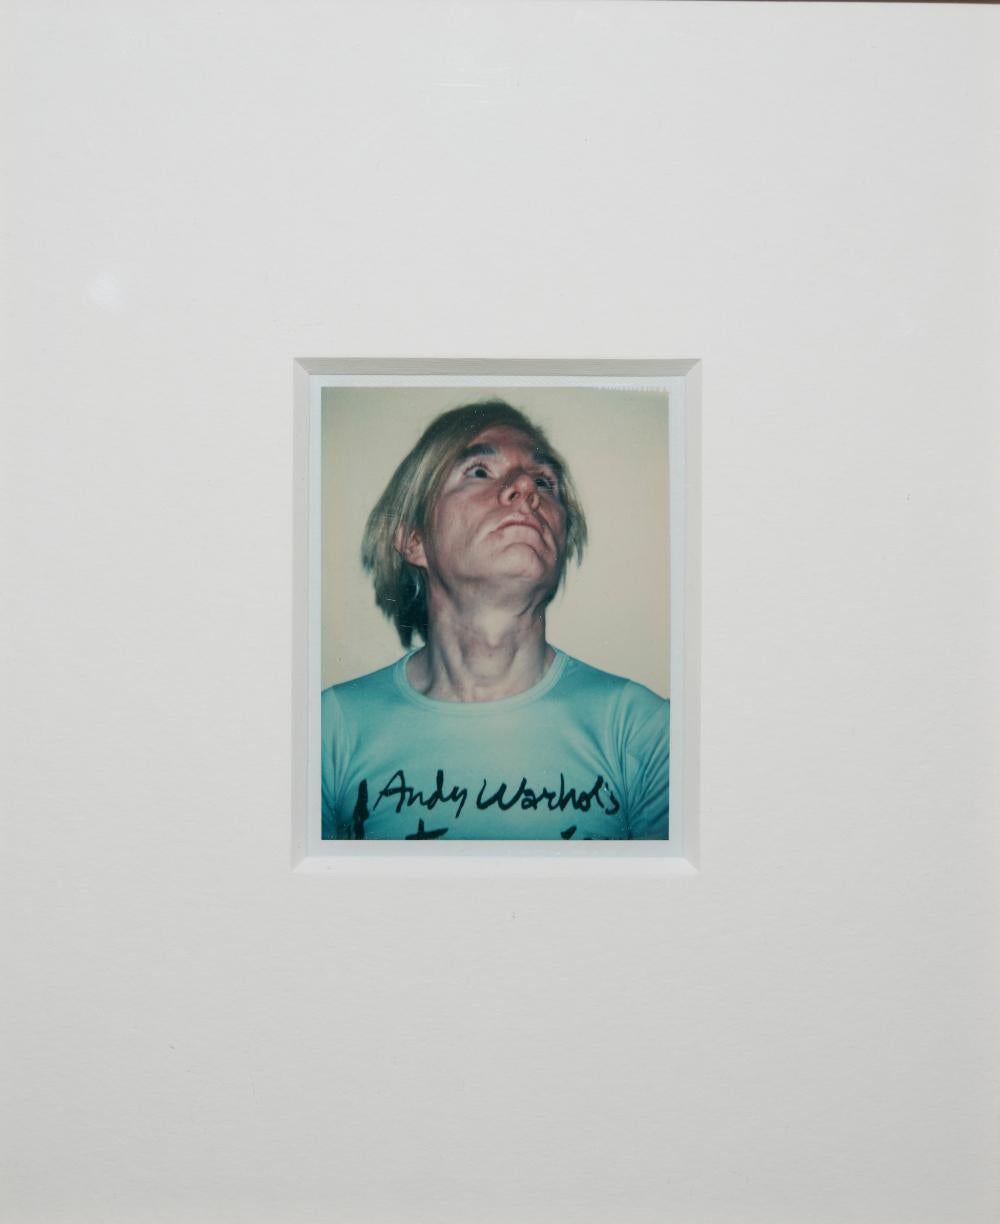 Self-Portrait - Photograph by Andy Warhol